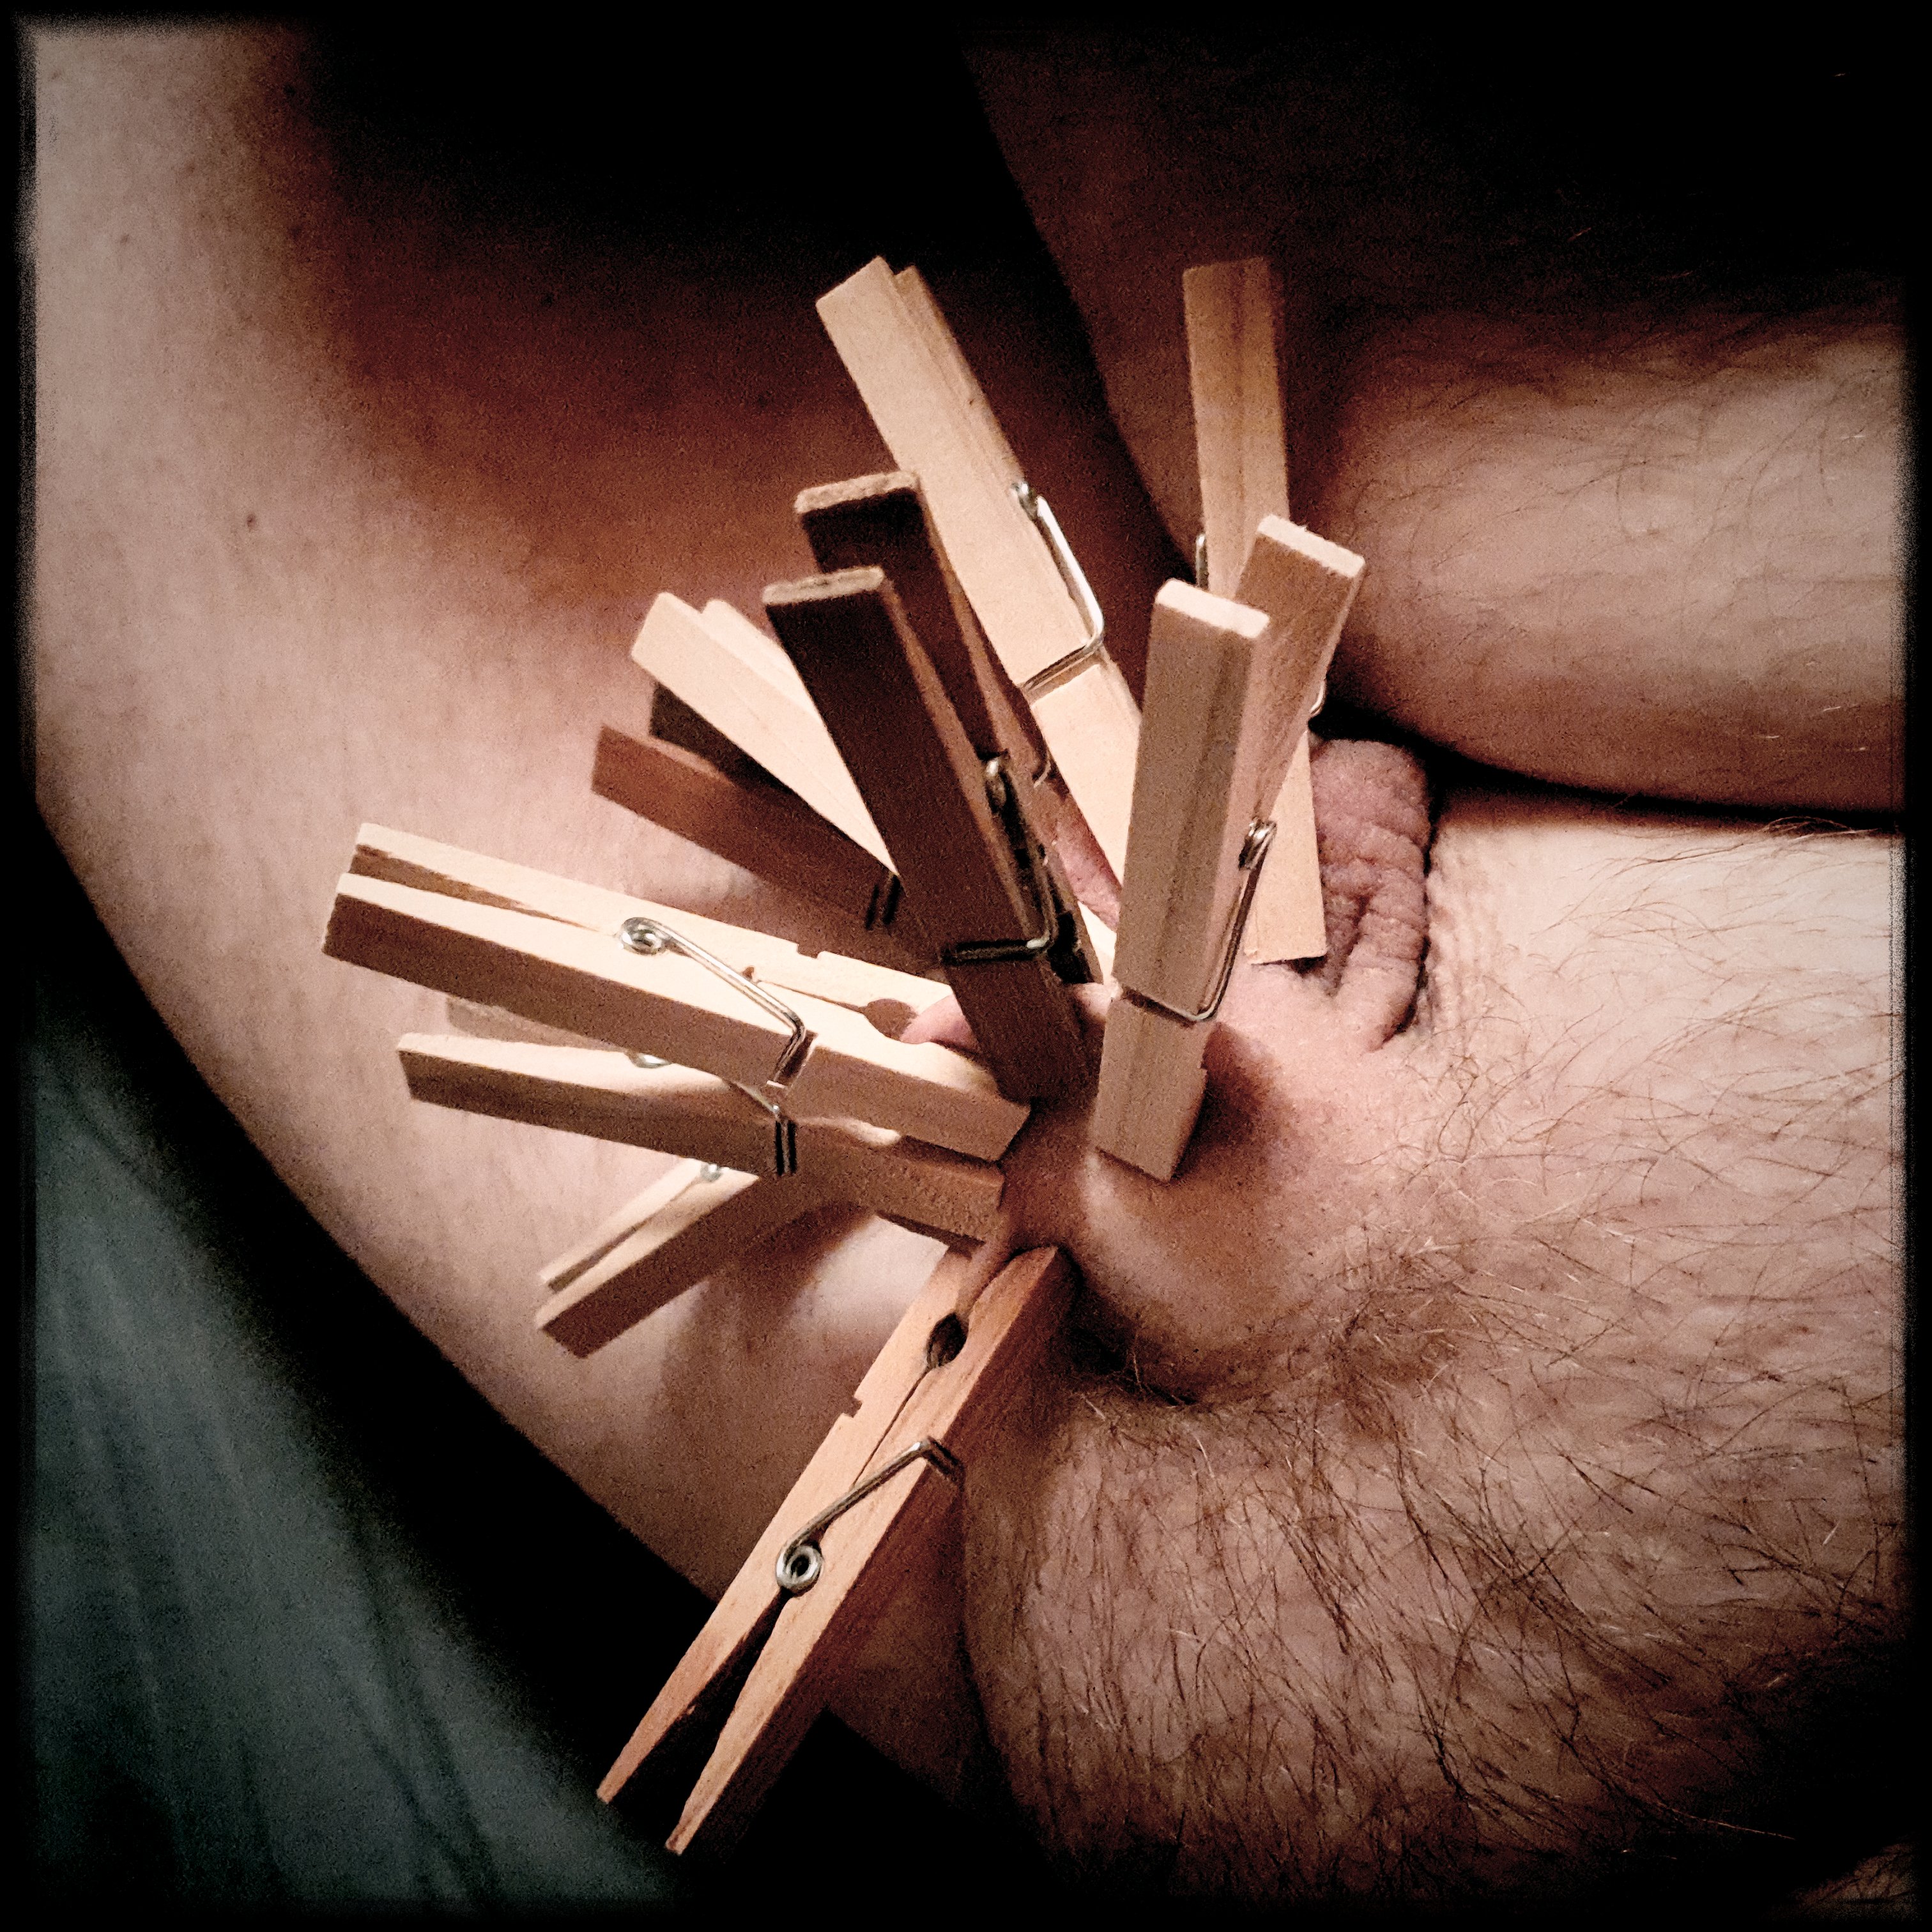 Clothspin on penis - 🧡 Clothespins on cock - 10 Pics xHamster.